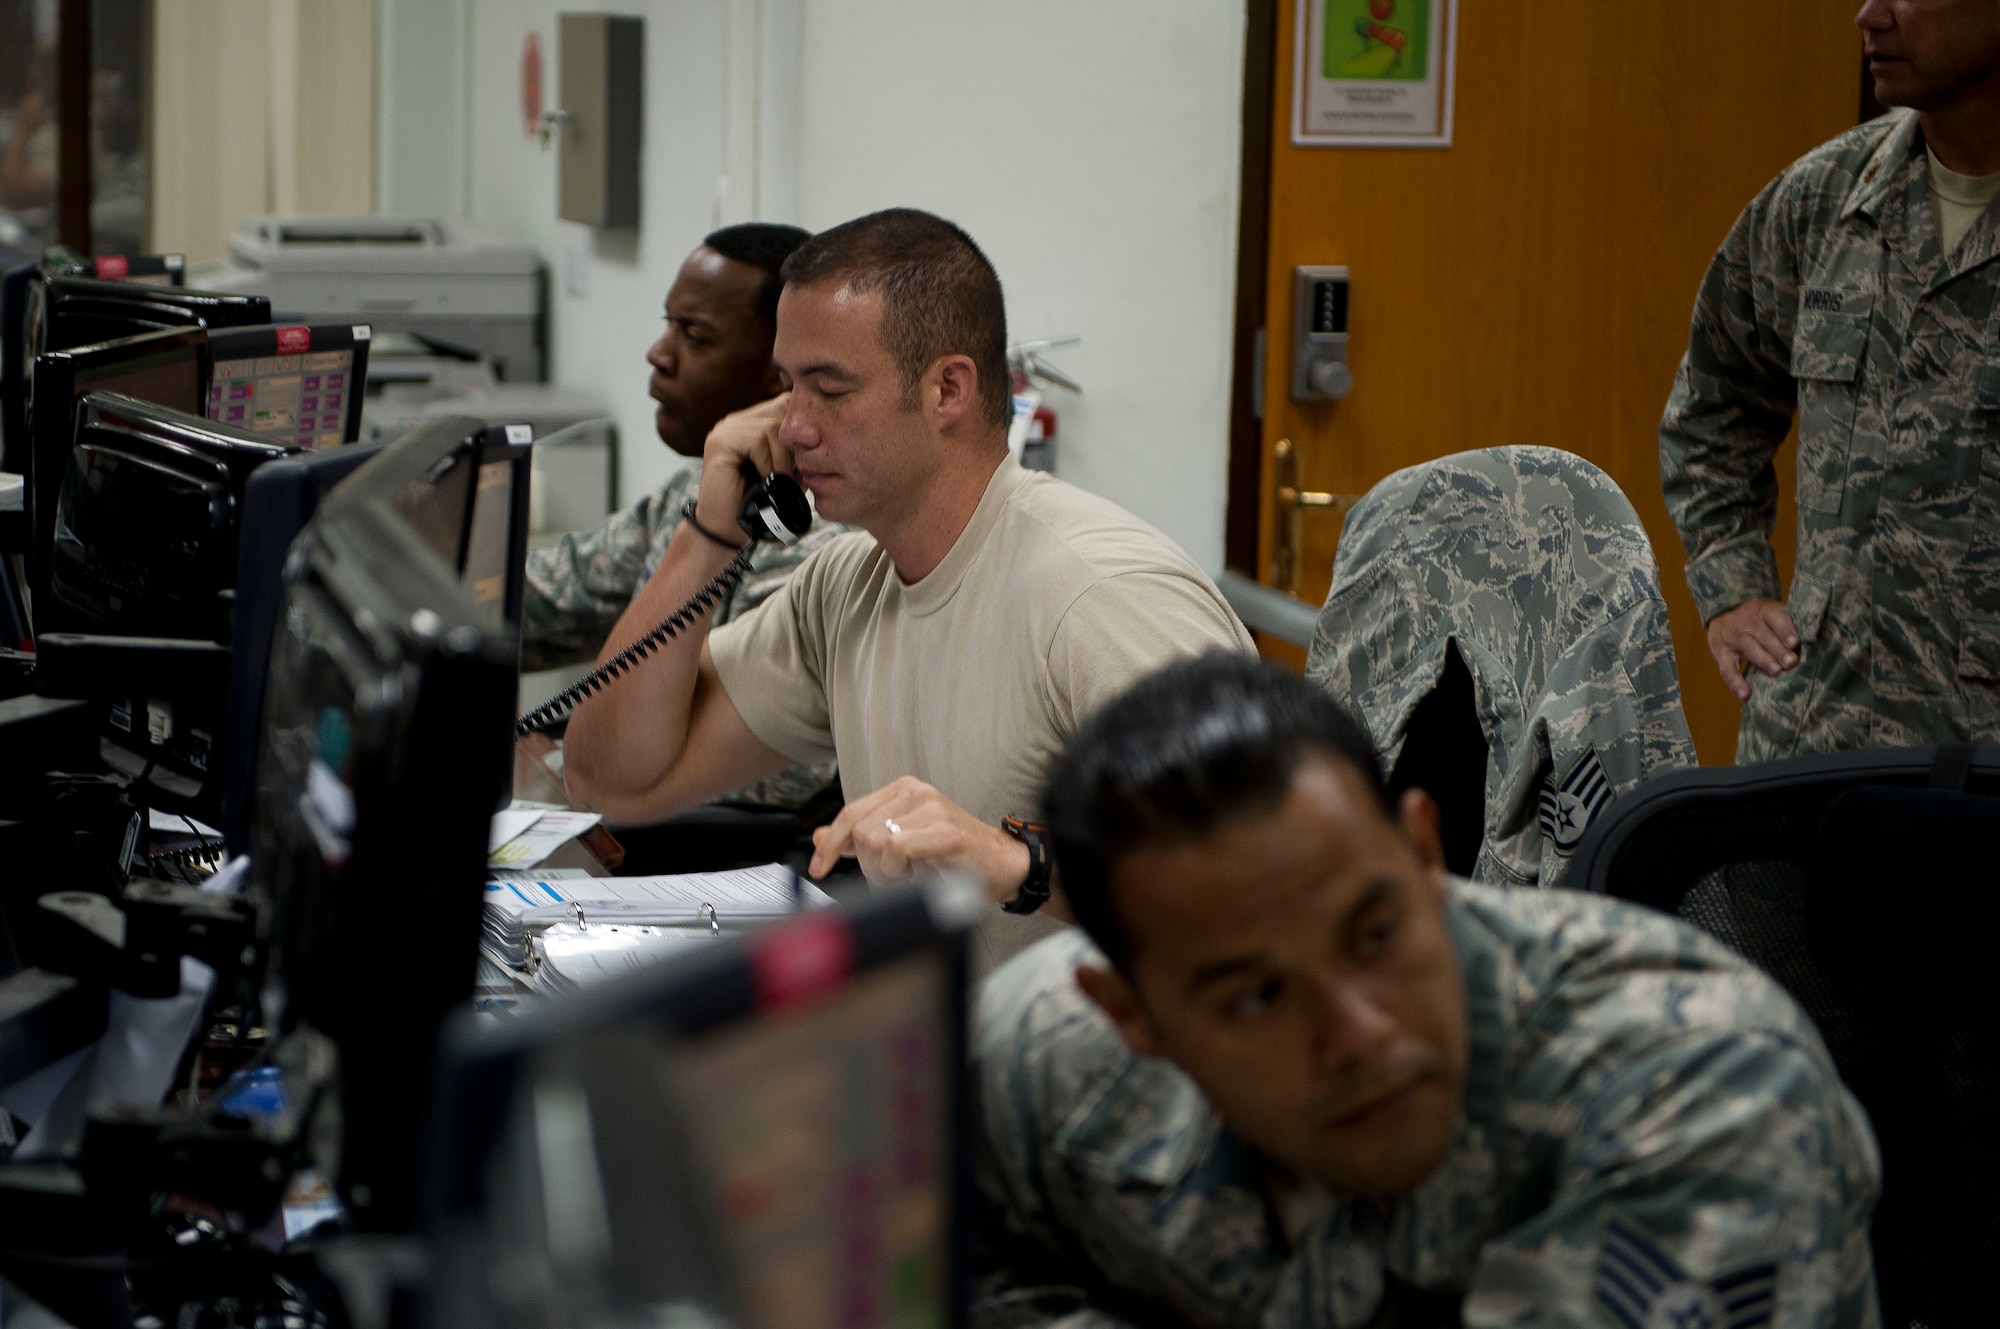 Staff Sgt. David Midyett, 728th Air Mobility Squadron, answers the phone in the air transportation operations center July 11, 2011, at Incirlik Air Base, Turkey. The center directs maintenance operations and airlift support aircraft arrivals and departures. (U.S. Air Force photo by Tech. Sgt. Michael B. Keller/Released)